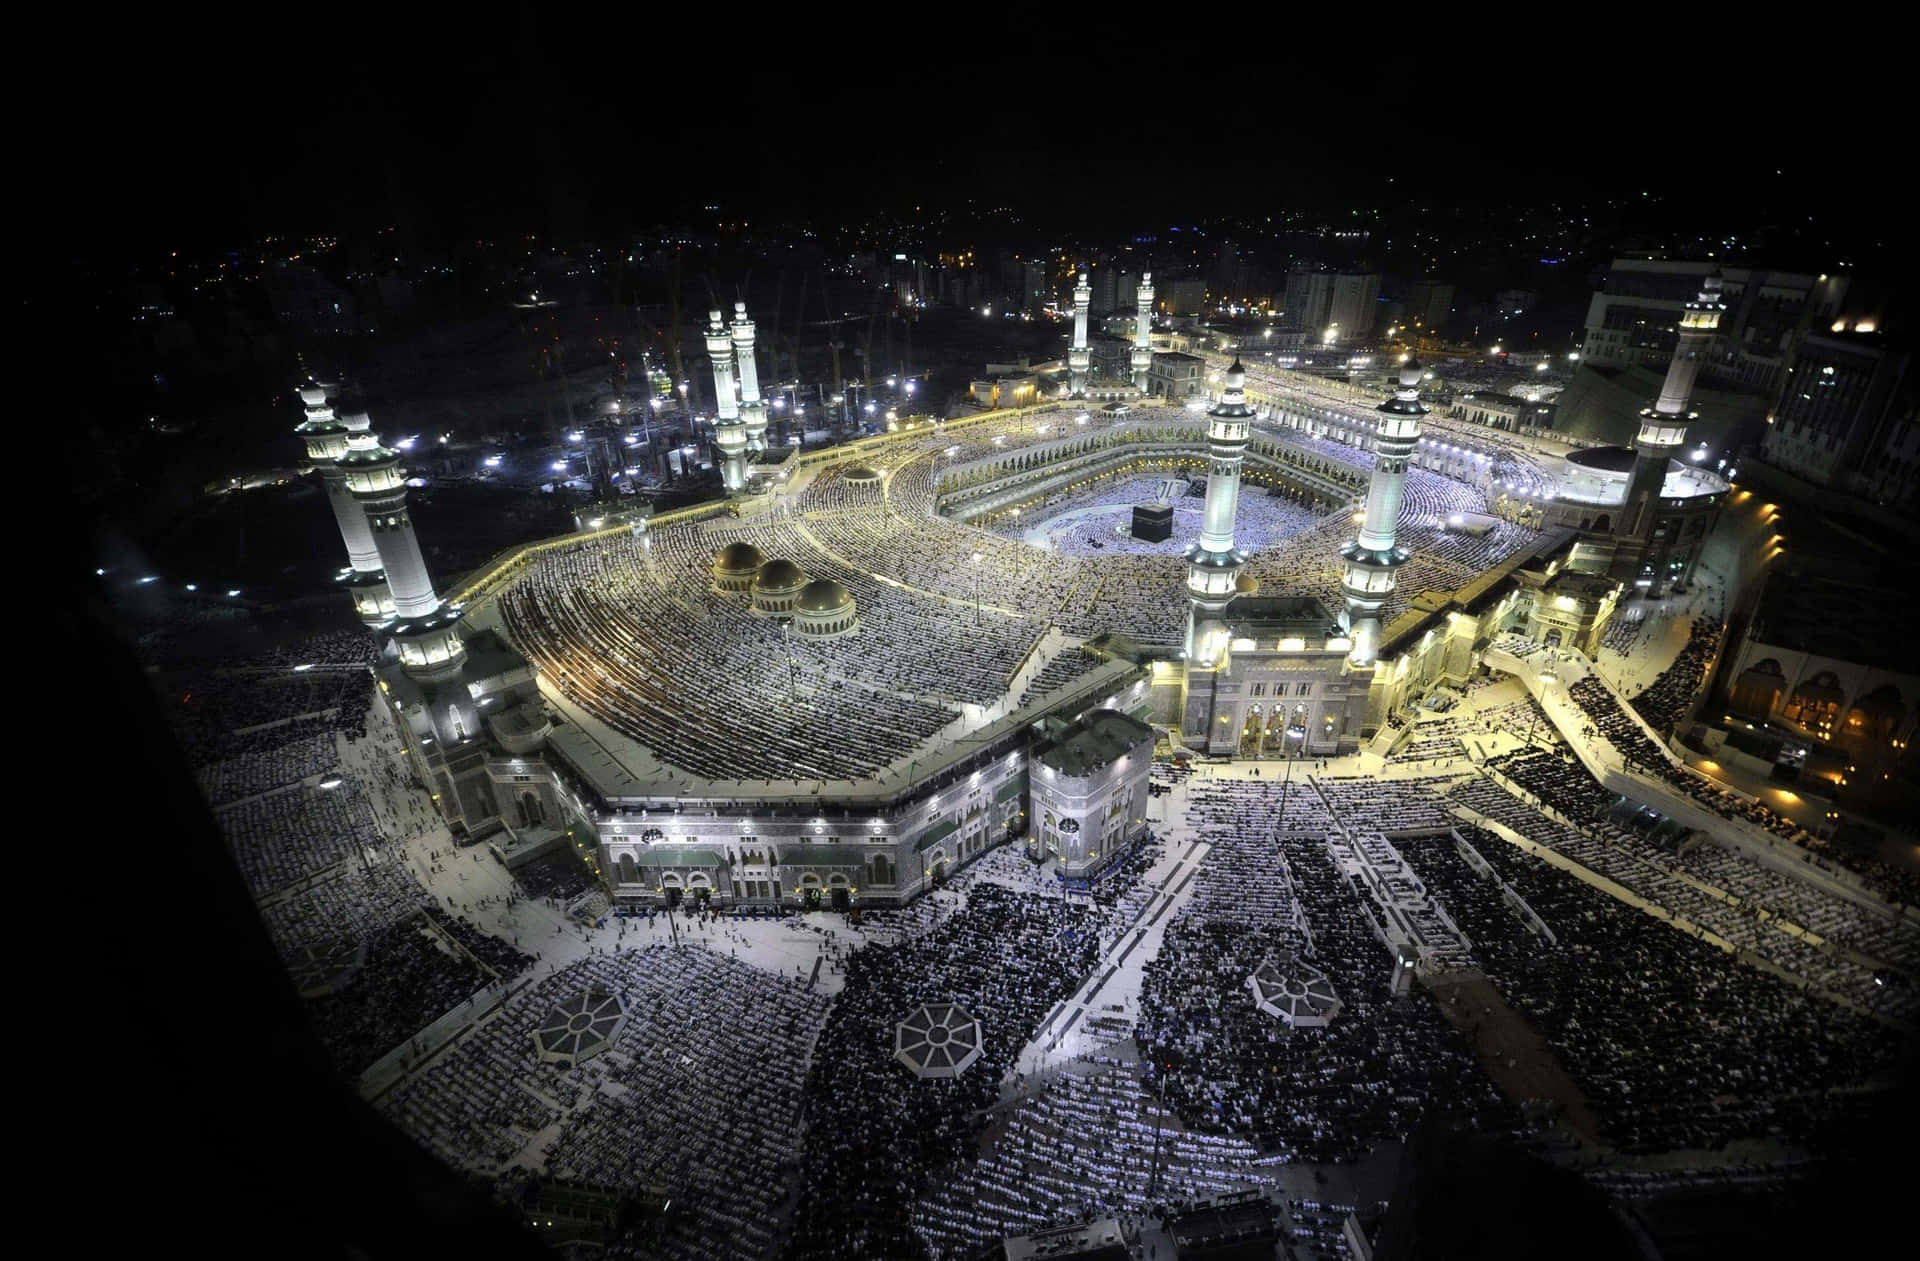 The Grand Mosque Of Mecca Is Seen From A High Tower